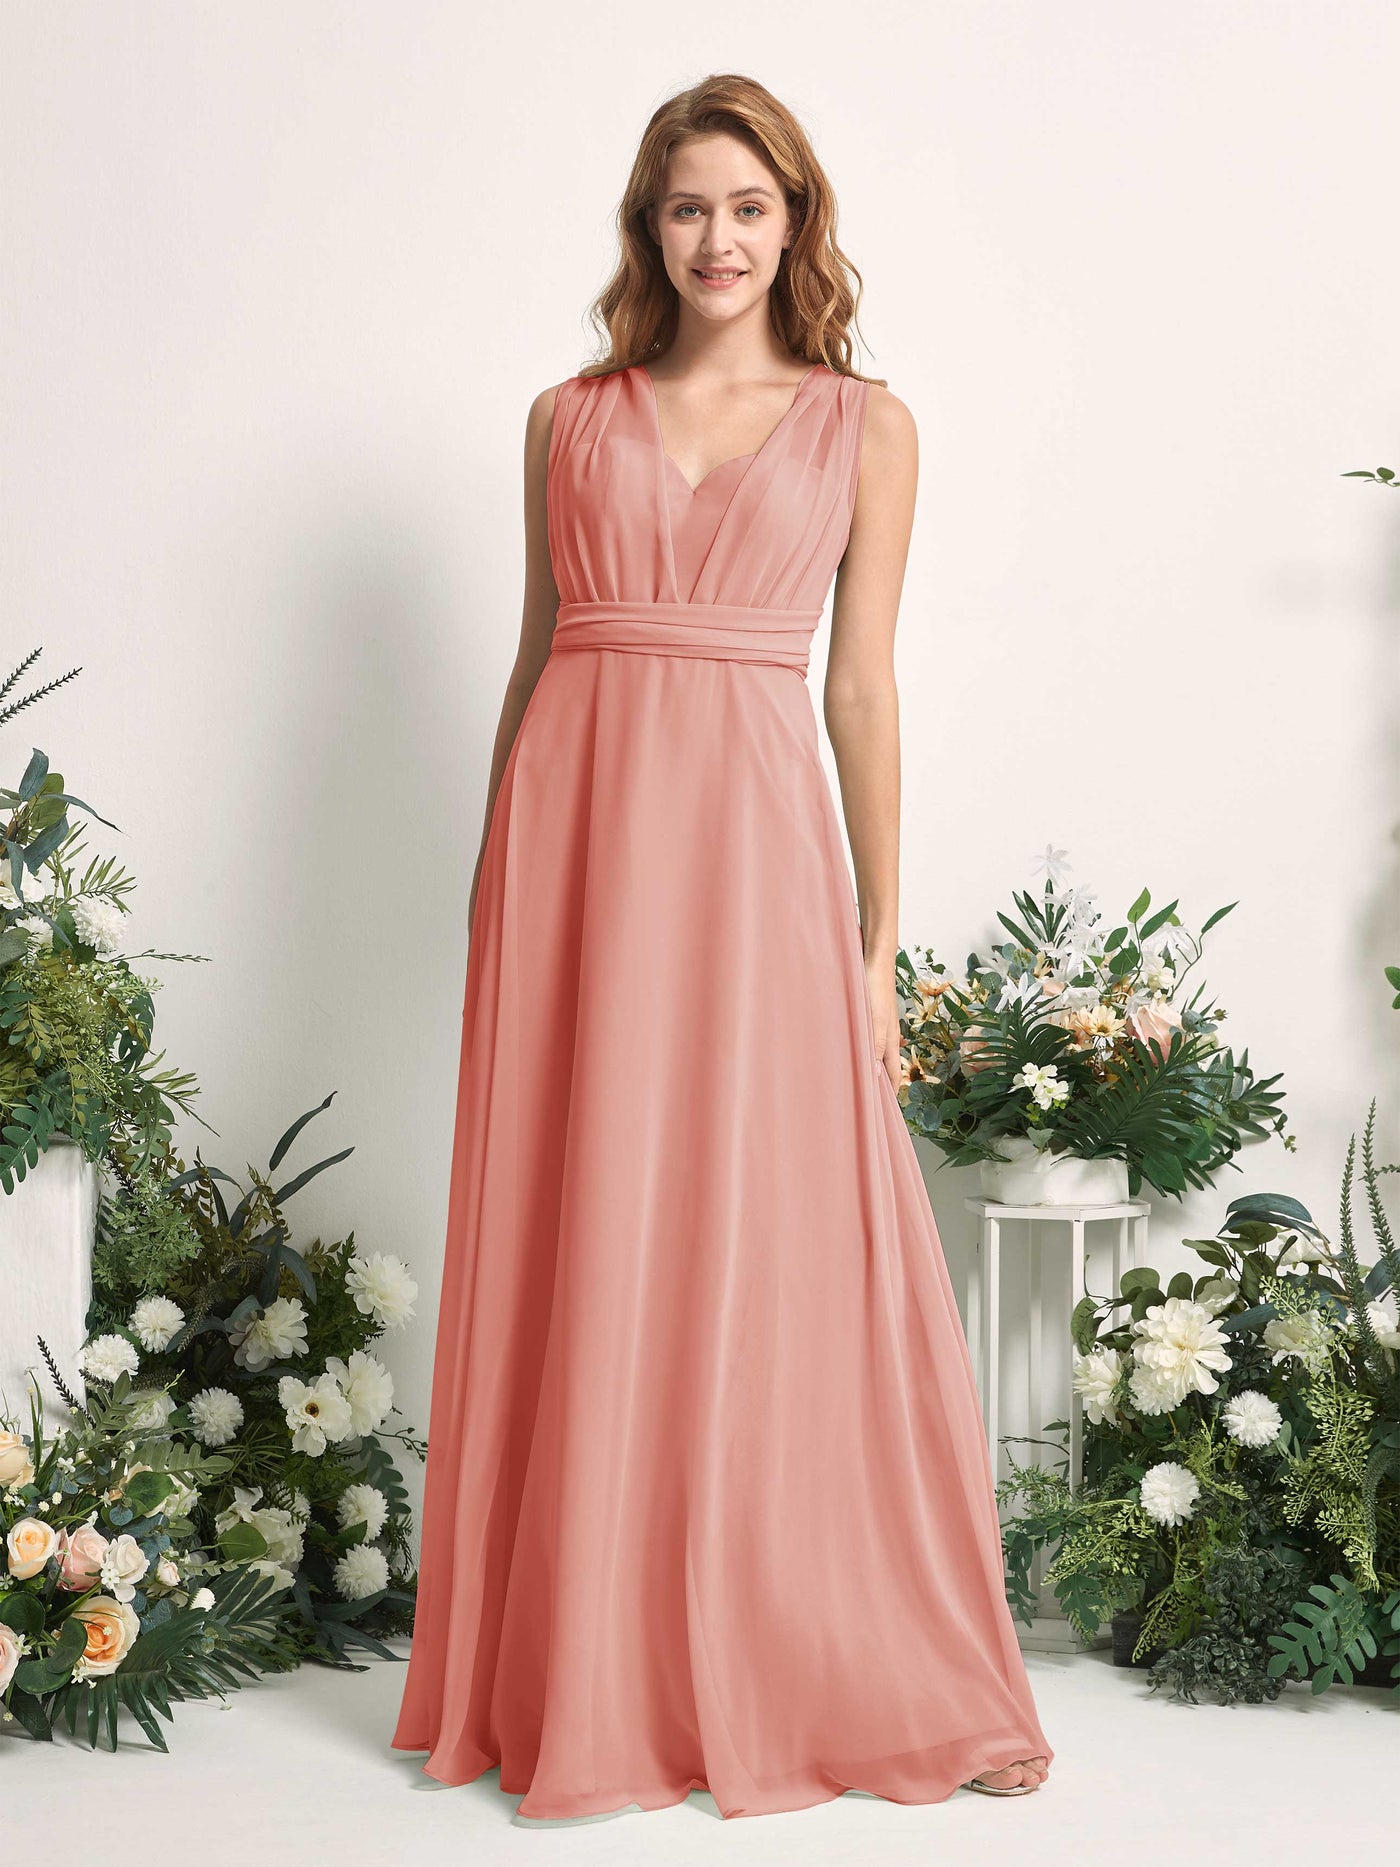 Champagne Rose Bridesmaid Dresses Bridesmaid Dress A-line Chiffon Halter Full Length Short Sleeves Wedding Party Dress (81226306)#color_champagne-rose